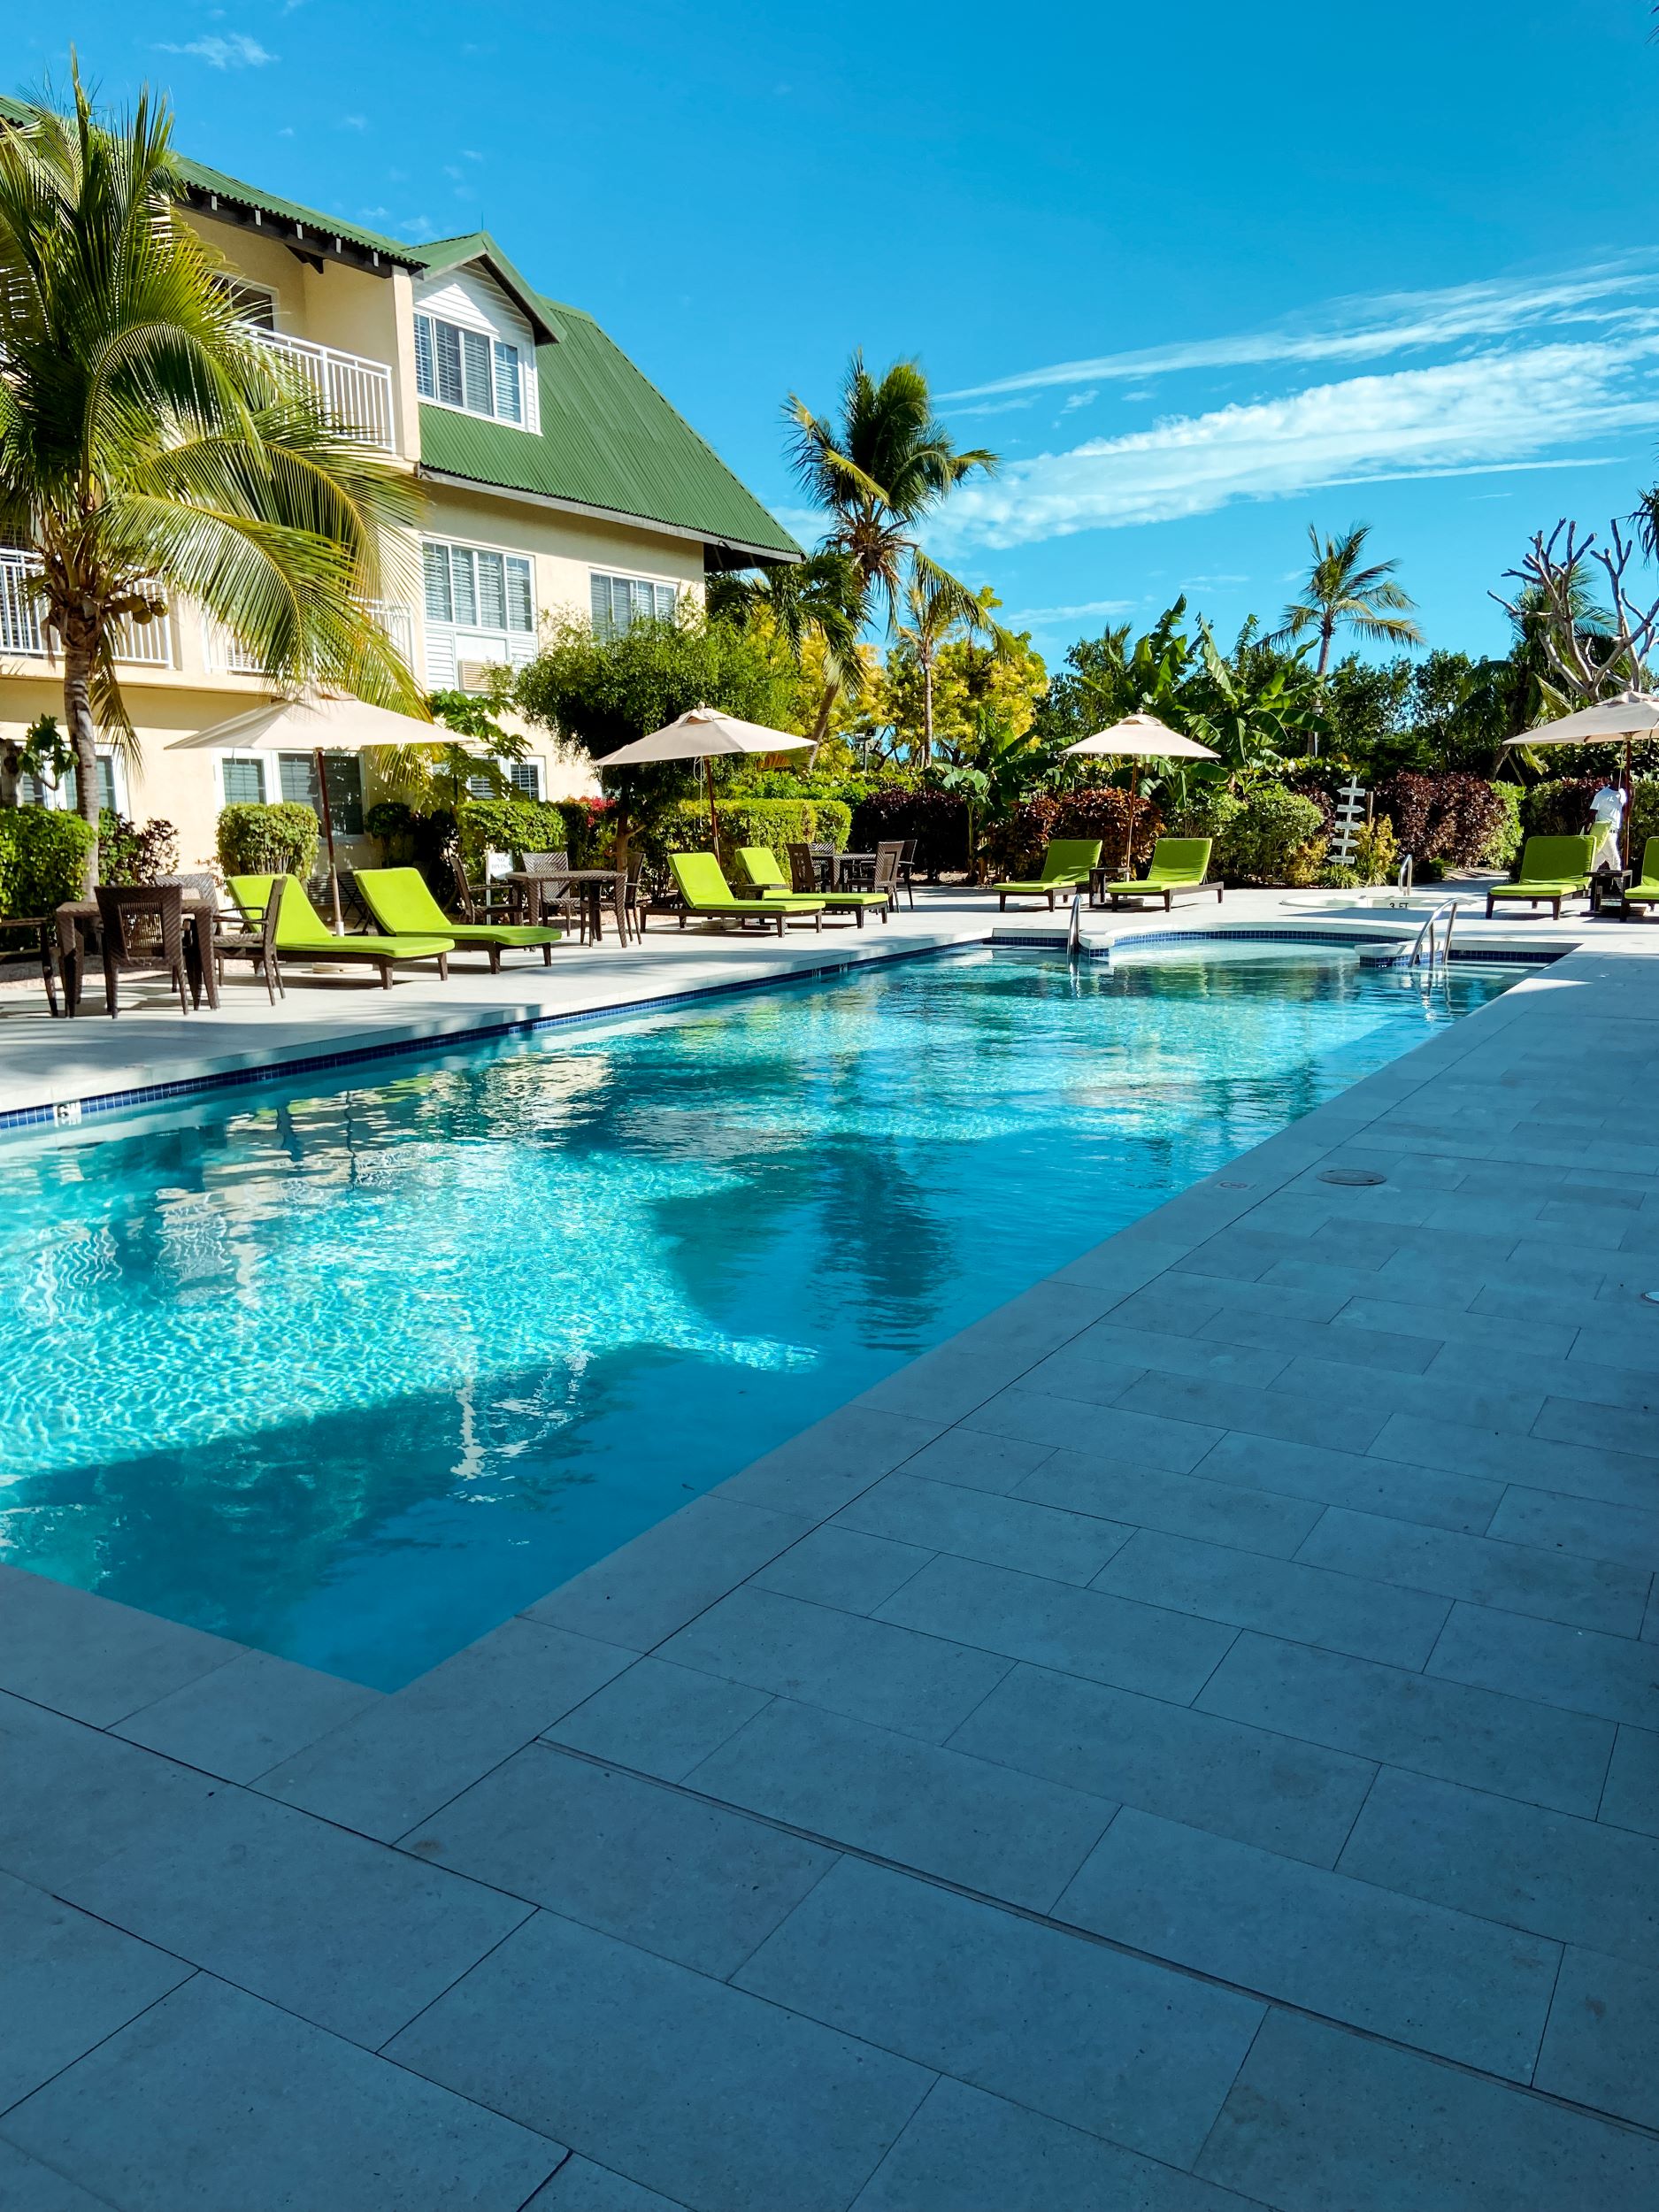 Ports of Call Resort: a Budget Hotel in Turks and Caicos